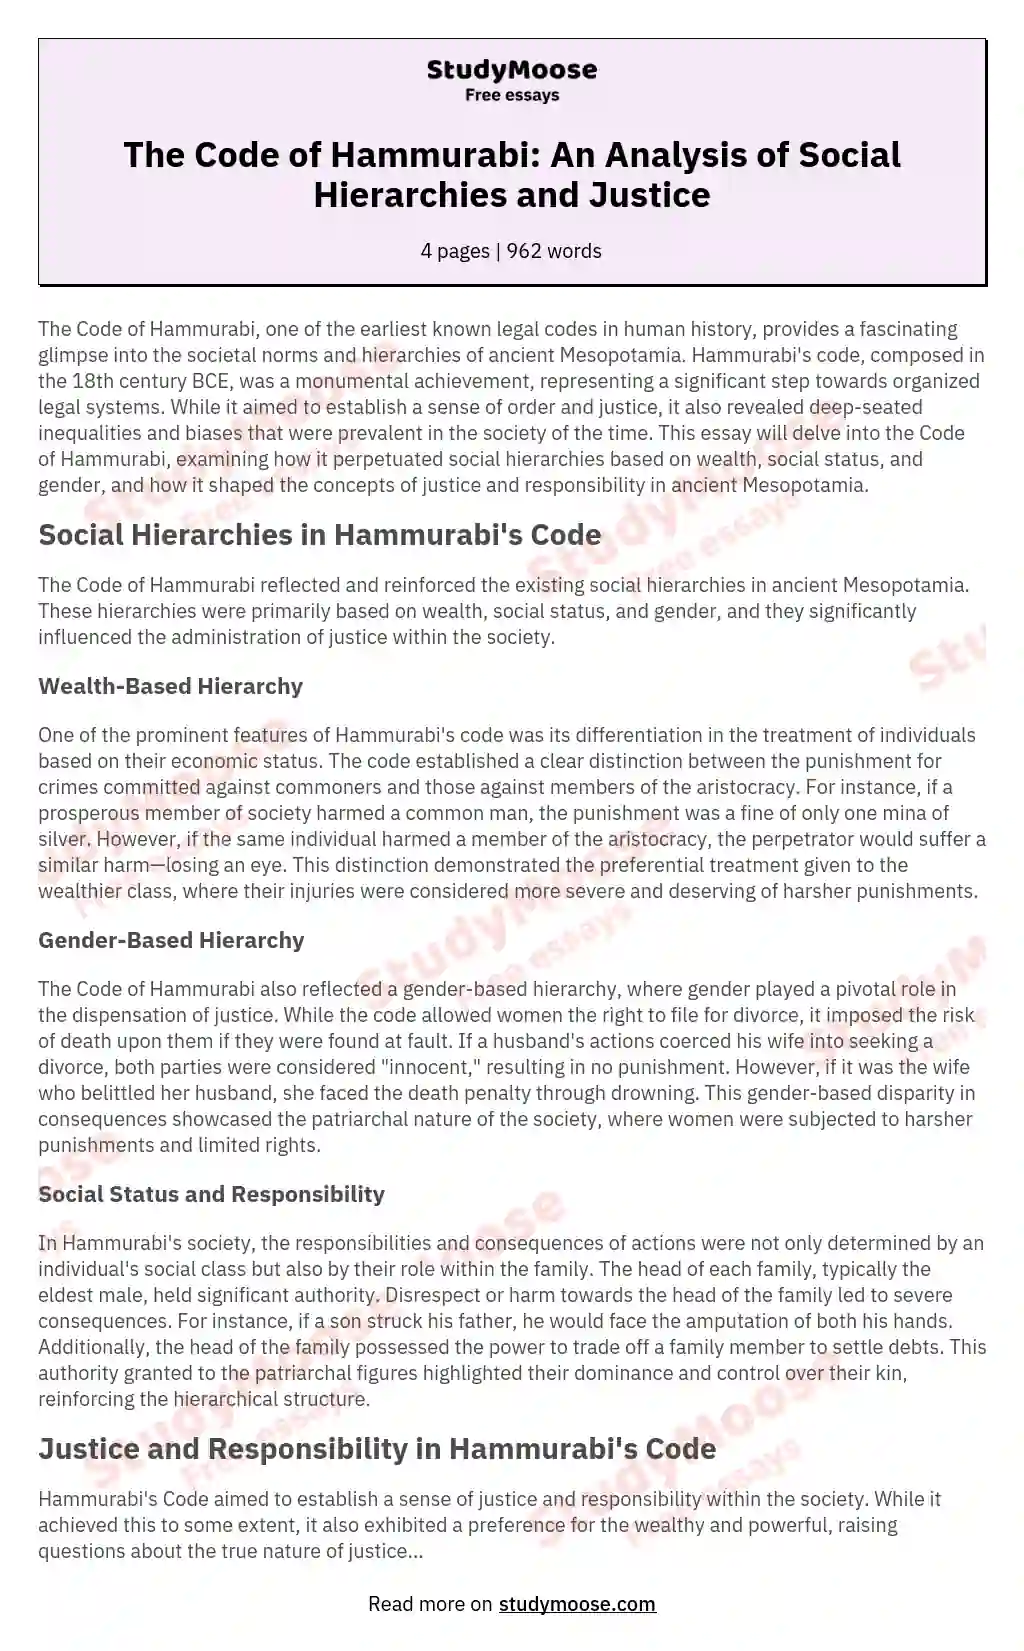 The Code of Hammurabi: An Analysis of Social Hierarchies and Justice essay